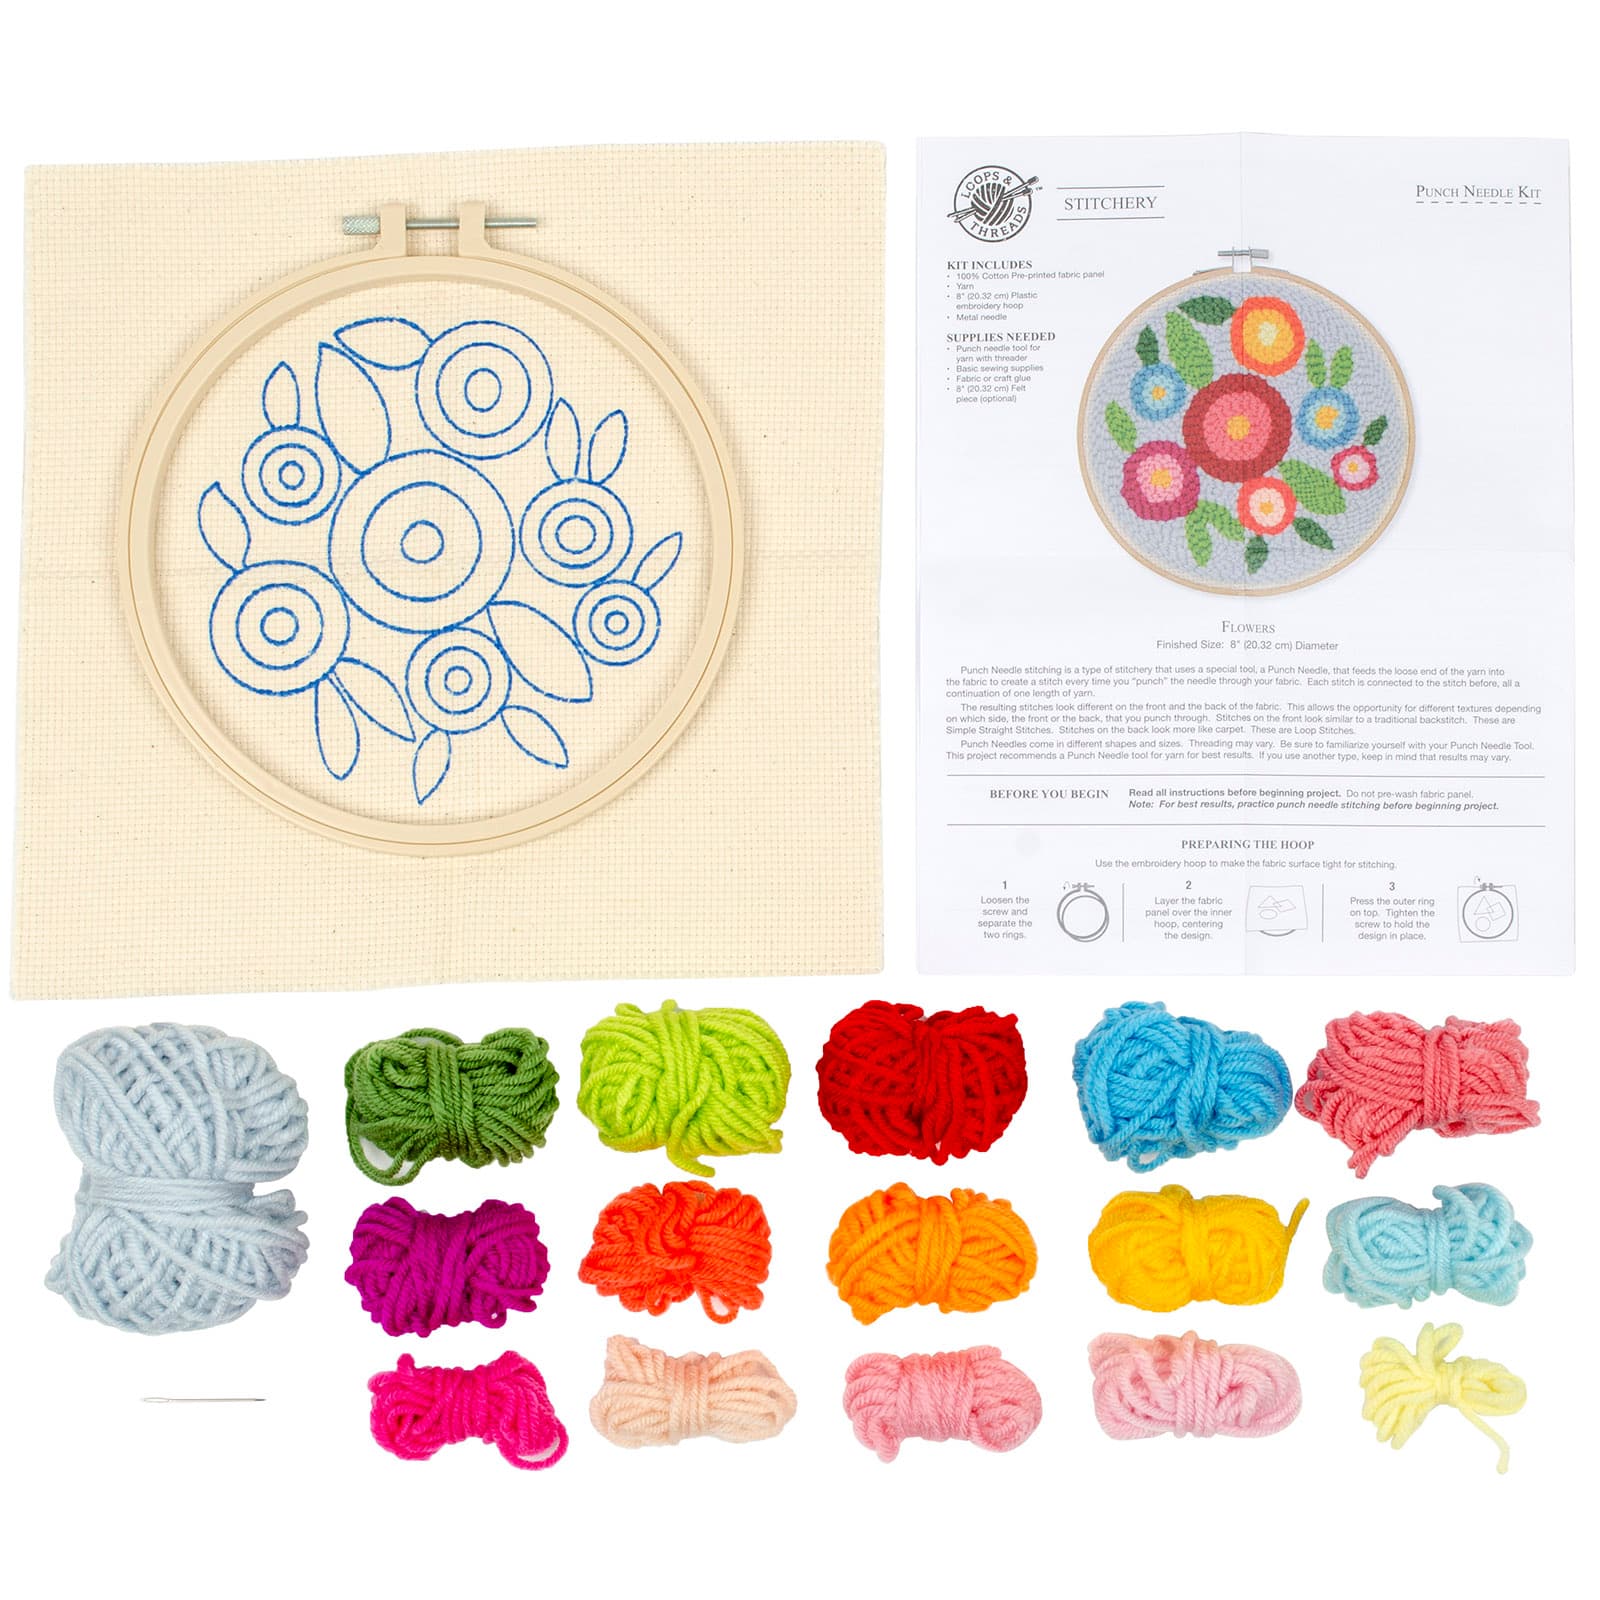  Pllieay Punch Needle Embroidery Starter Kits for Kids and  Adults Beginners, Include Instructions, Punch Needle Fabric with Floral  Pattern, Yarns, Embroidery Hoops and Threader Tools : Arts, Crafts & Sewing